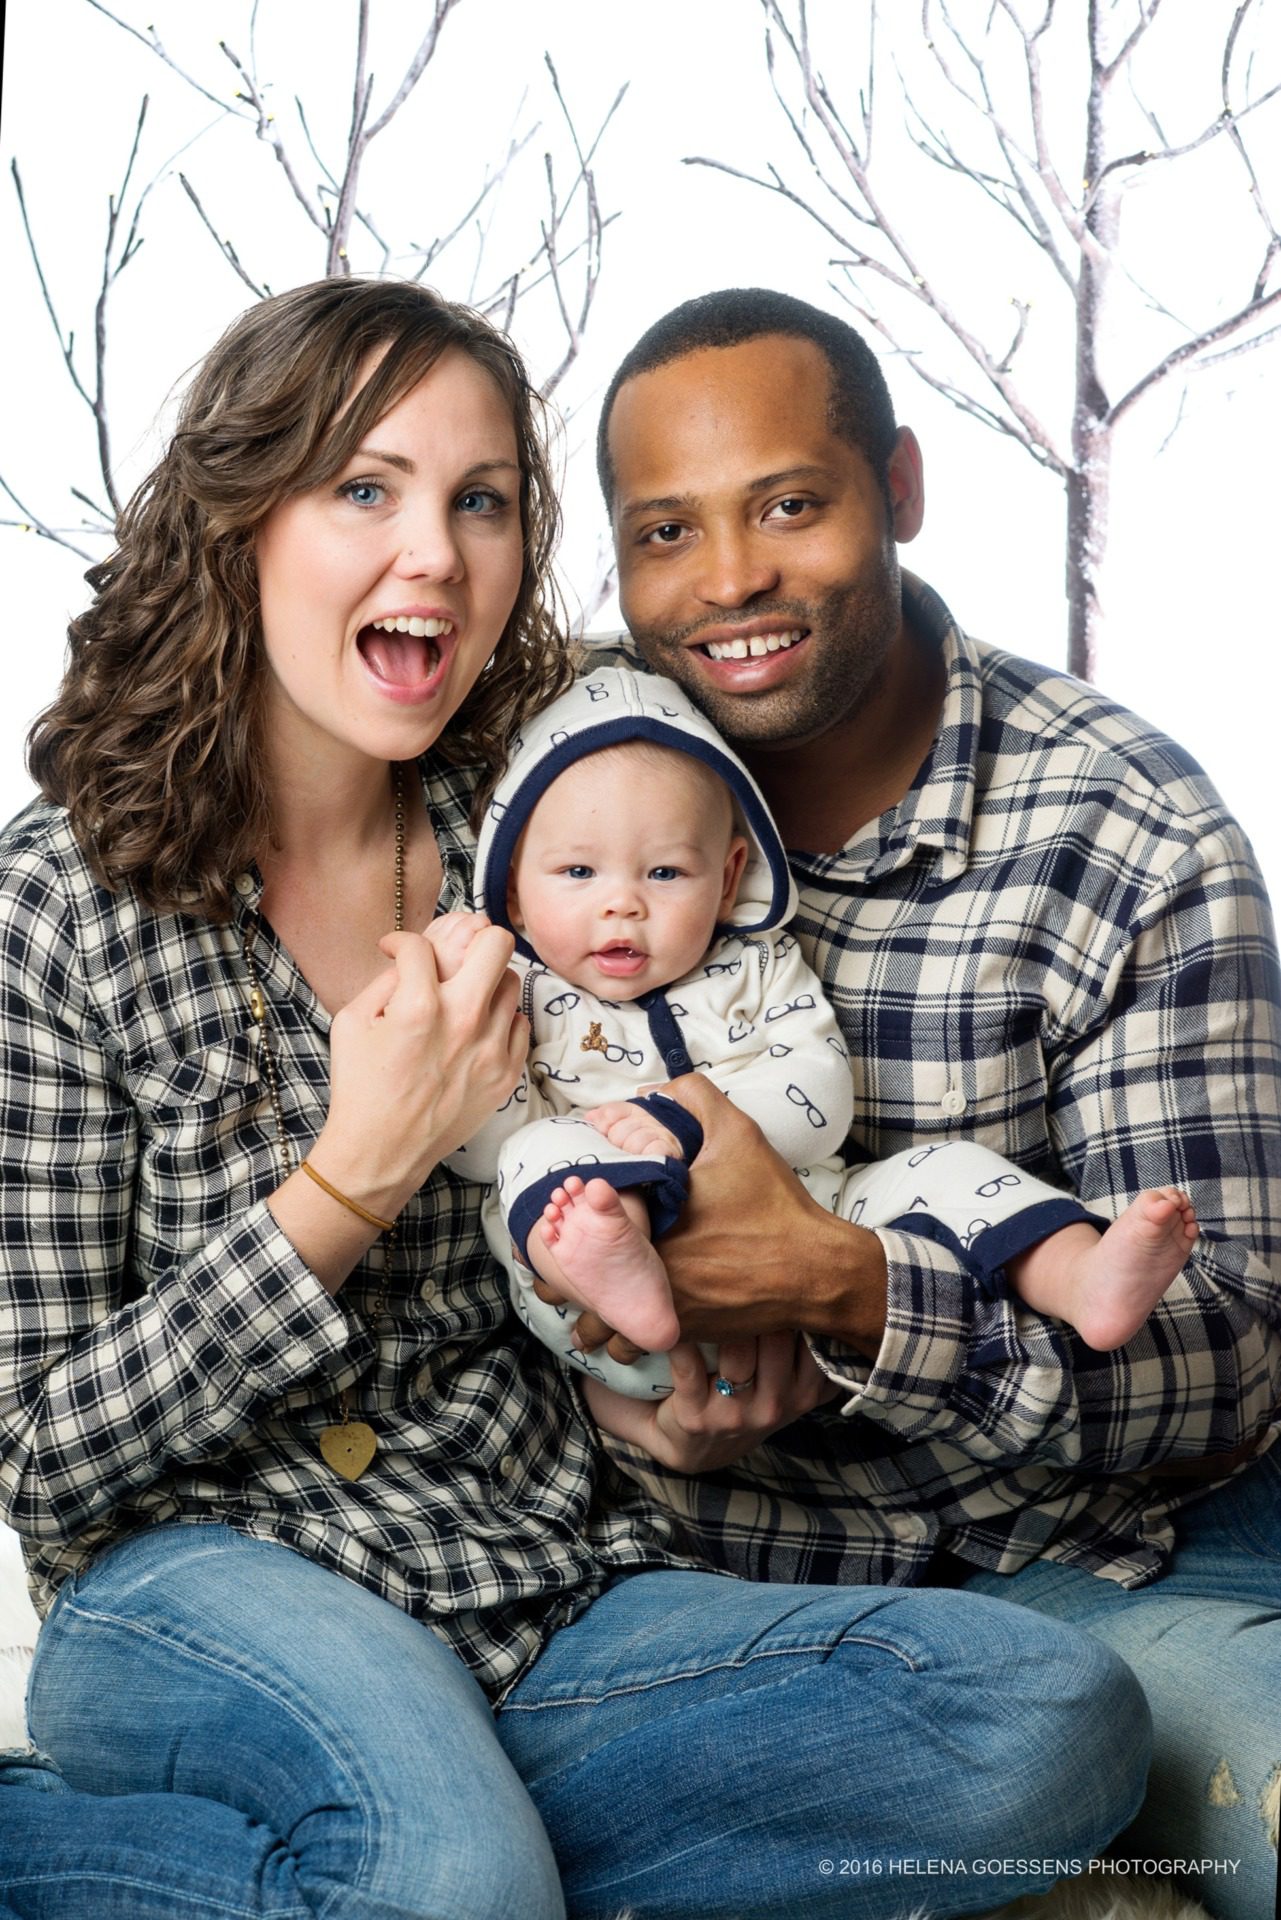 interracial couple with baby